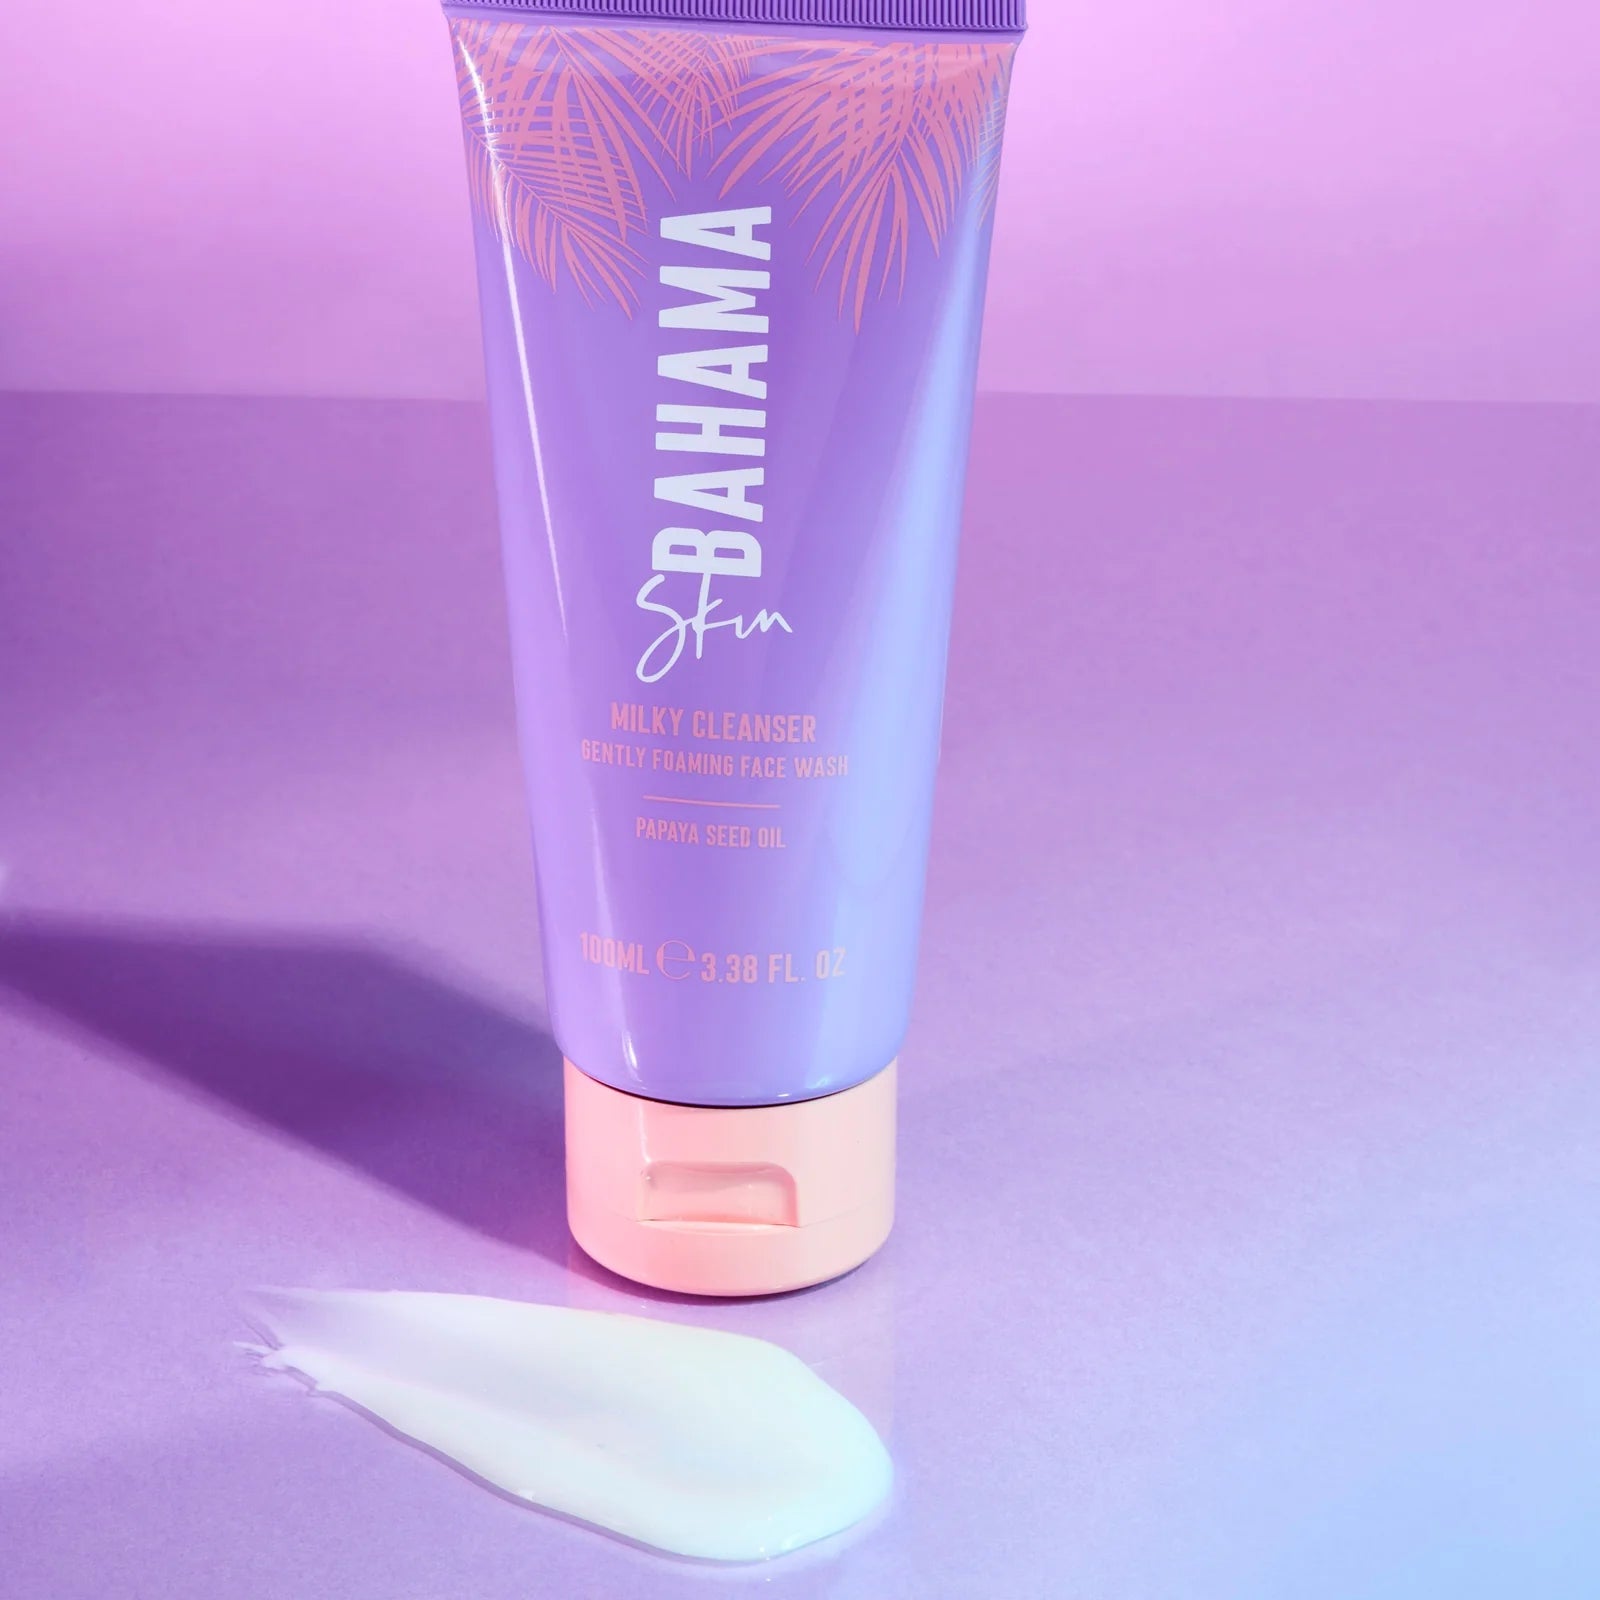 Bahama Skin Milky Cleanser Gently Foaming Face Wash 